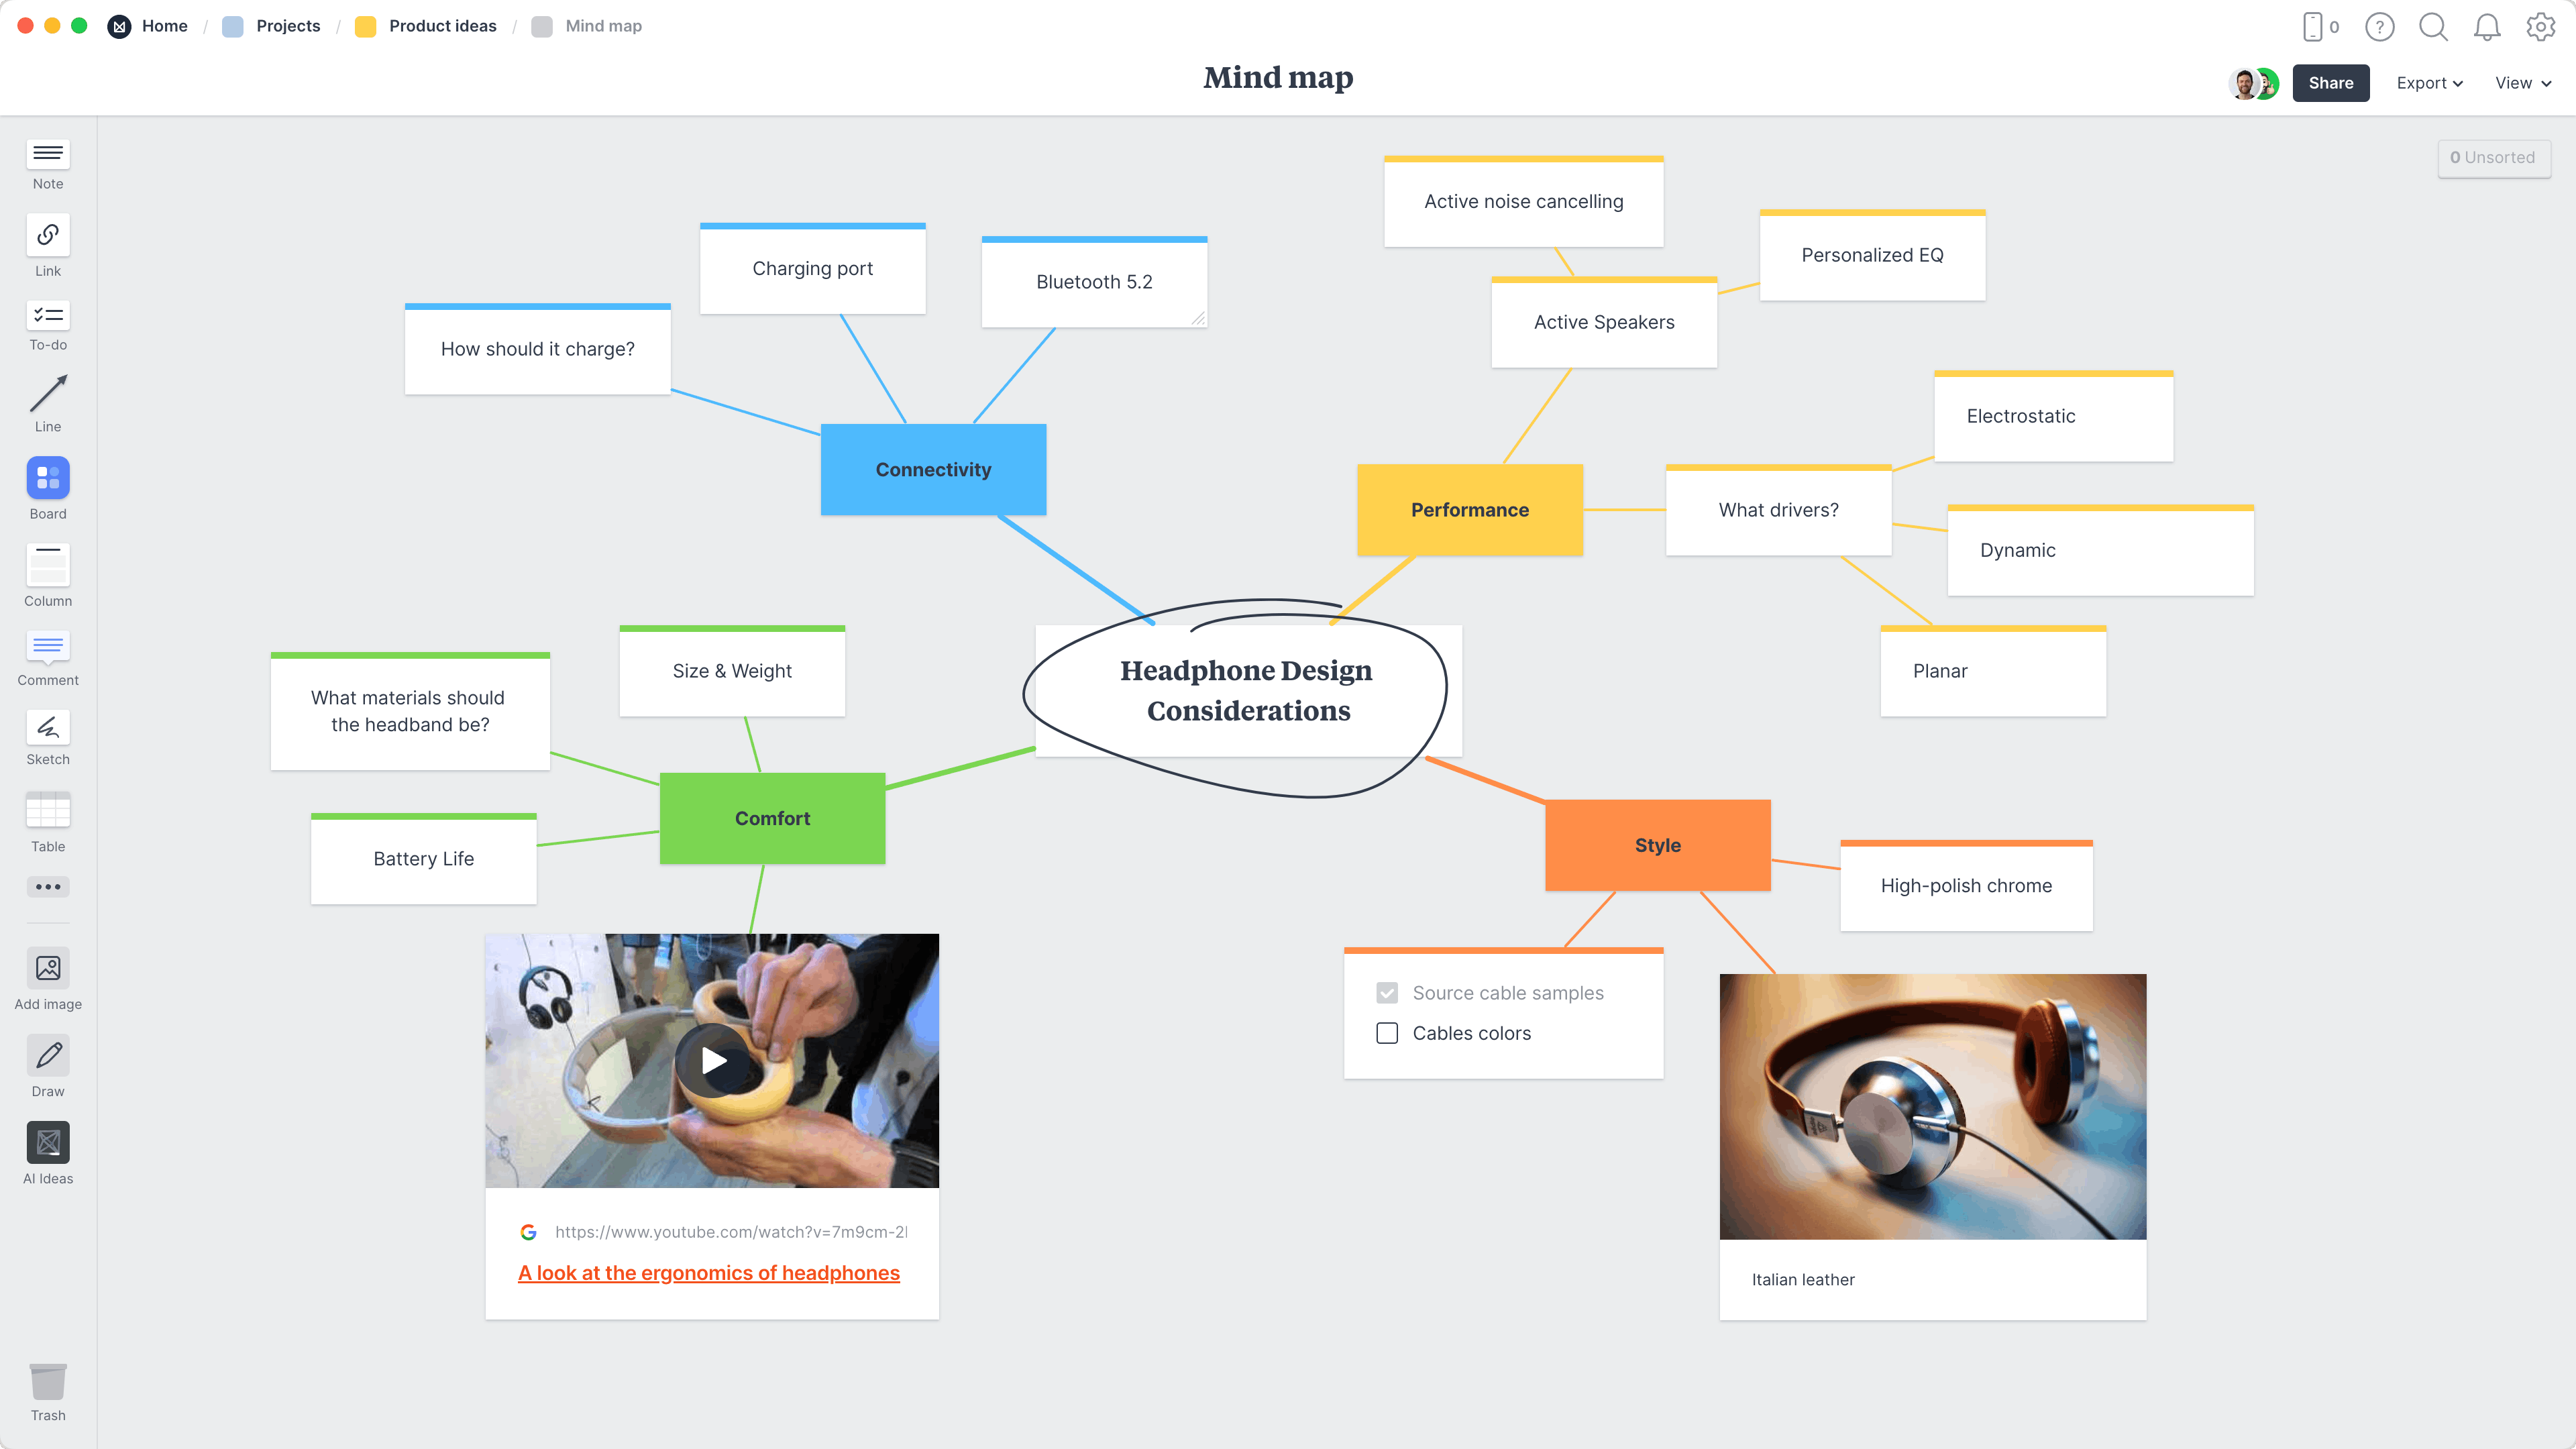 Mind Map Template, within the Milanote app